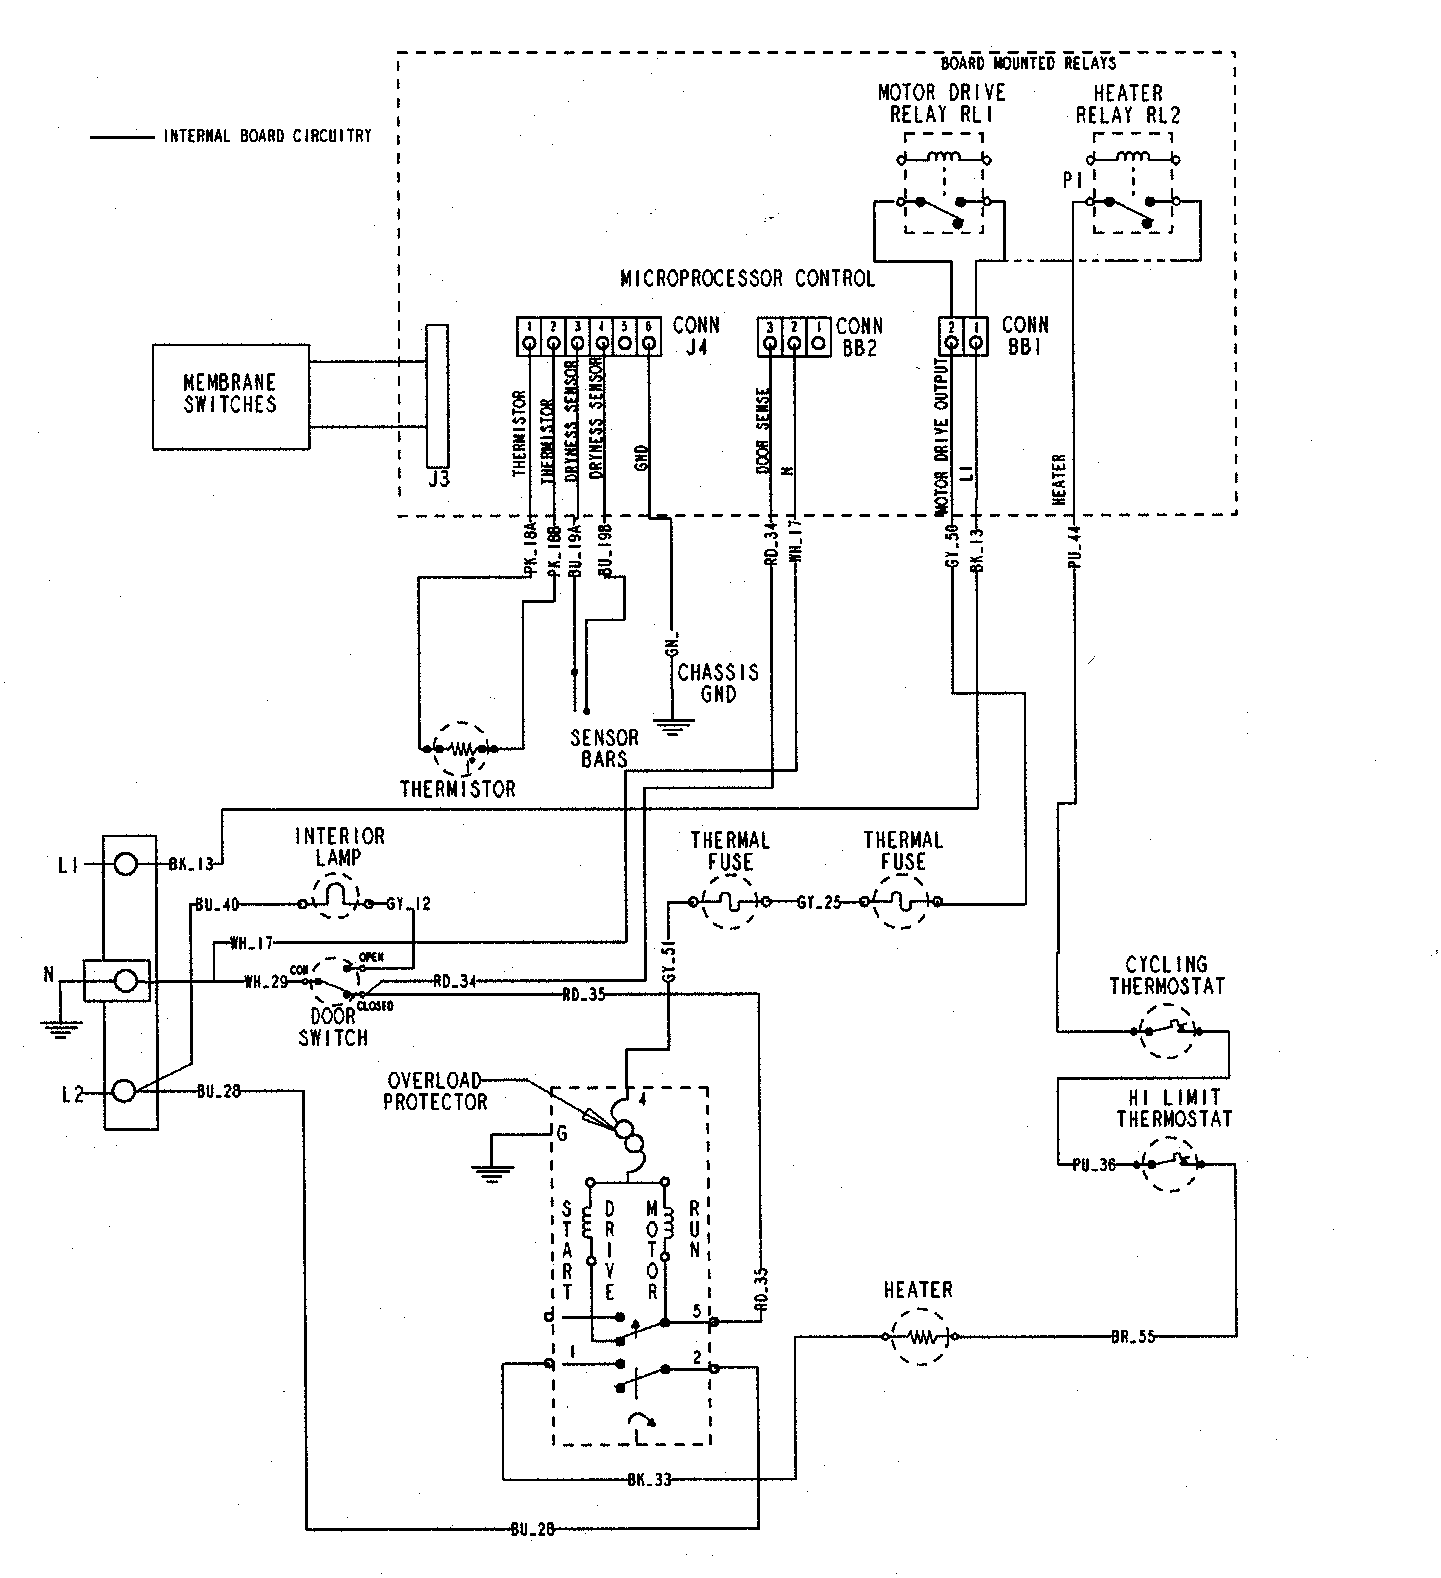 Maytag Dryer Door Switch Wiring Diagram from c.searspartsdirect.com